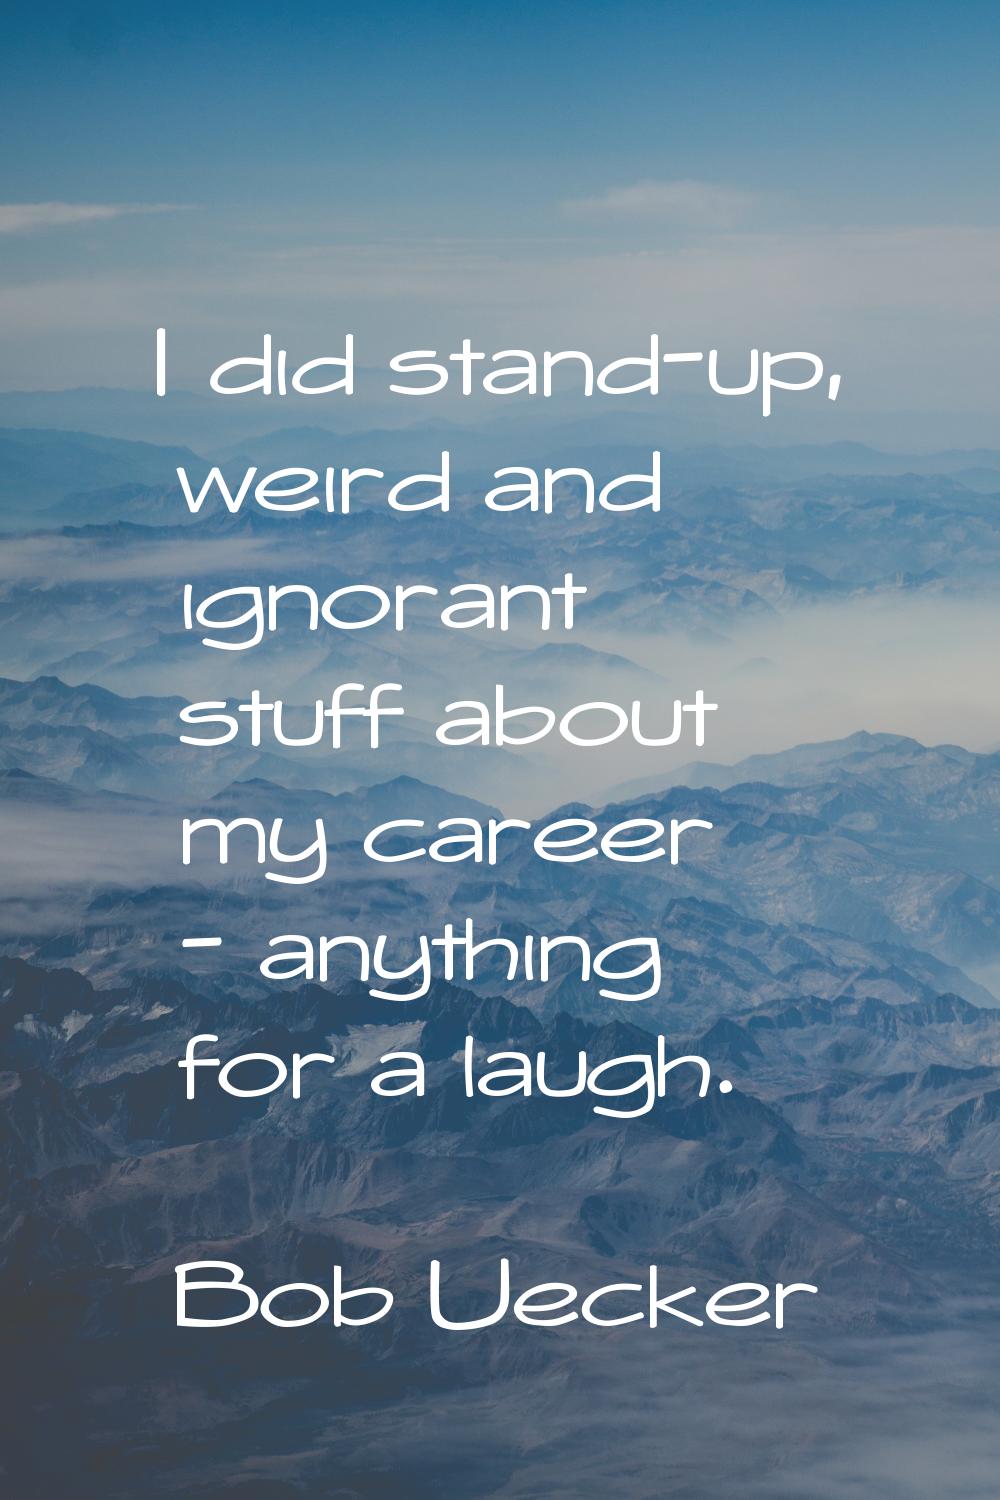 I did stand-up, weird and ignorant stuff about my career - anything for a laugh.